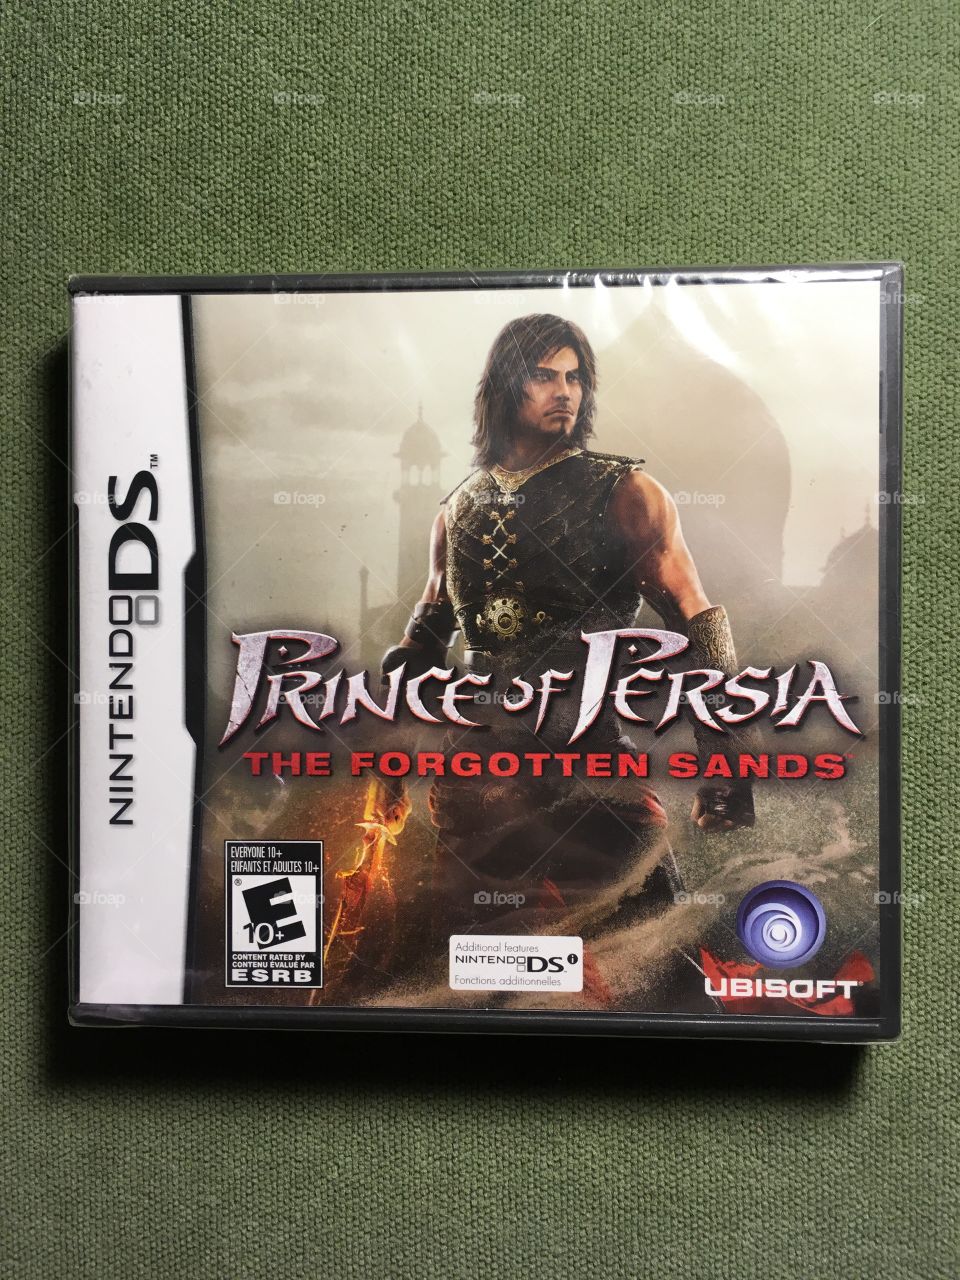 Prince of Persia - The Forgotten Sands
Brand New Sealed
2010